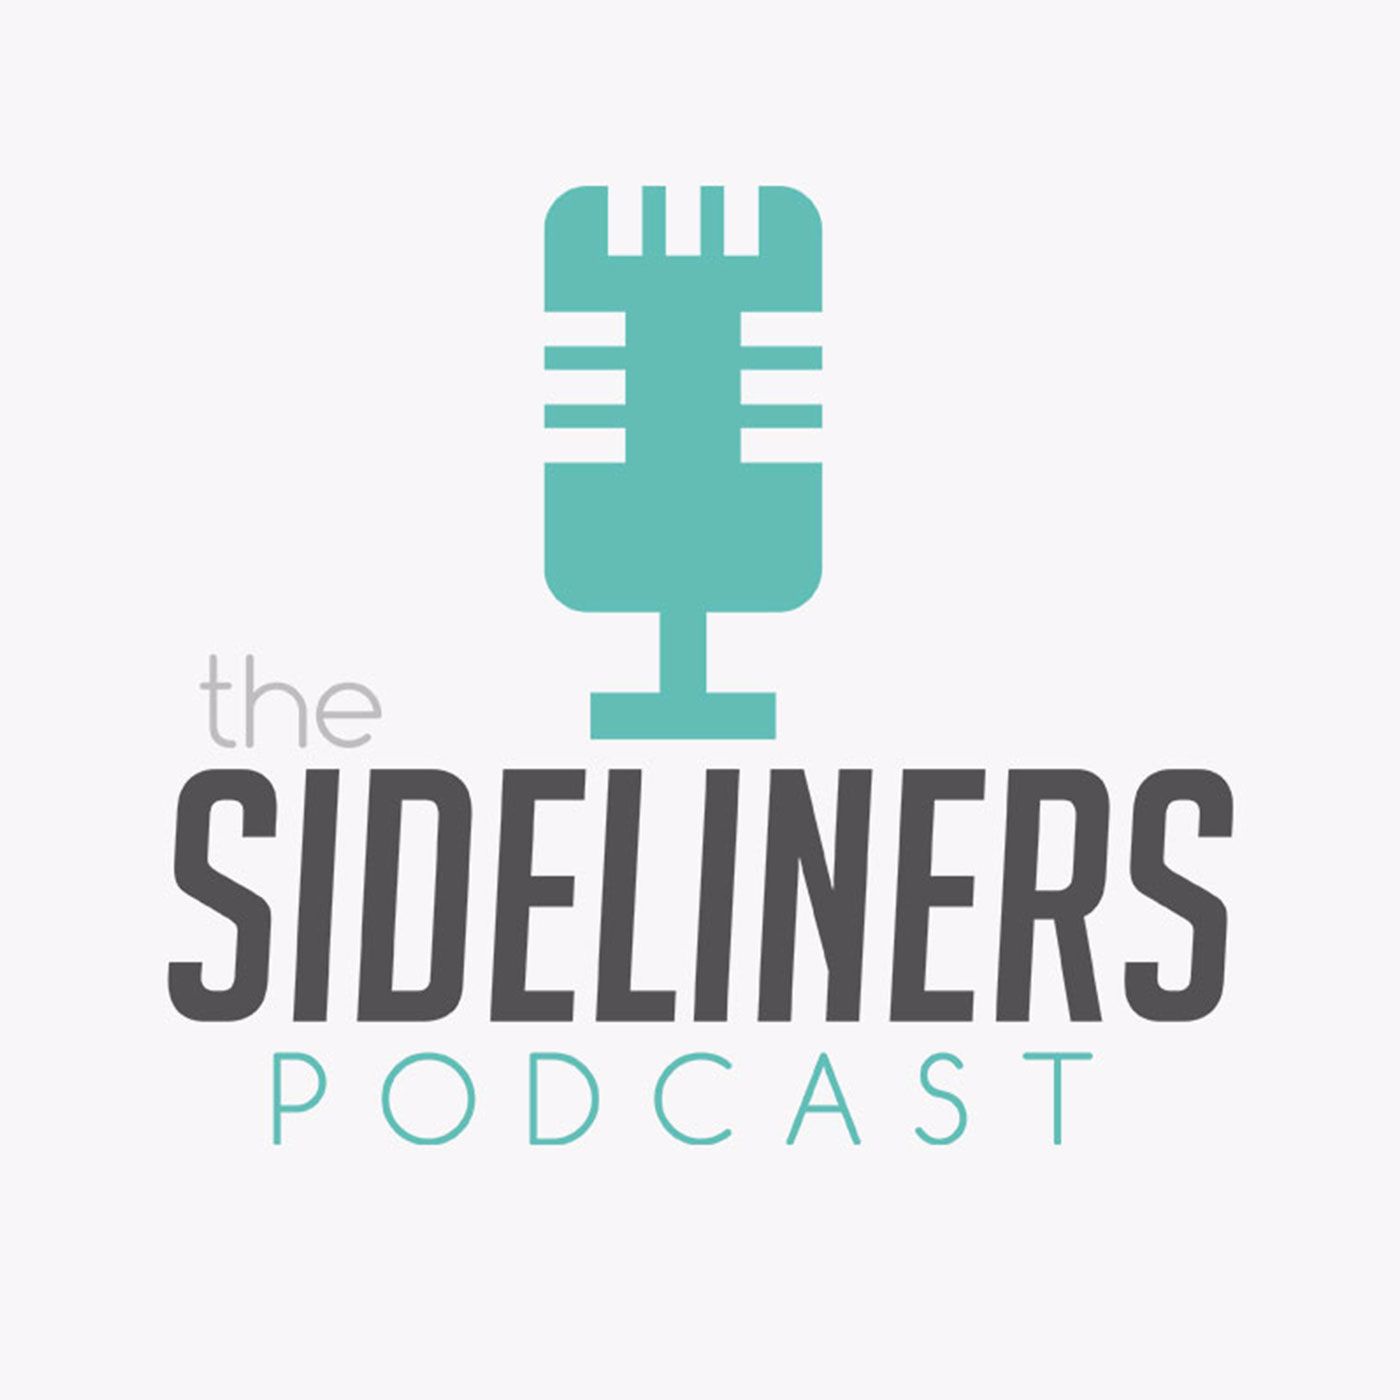 The Sideliners Podcast